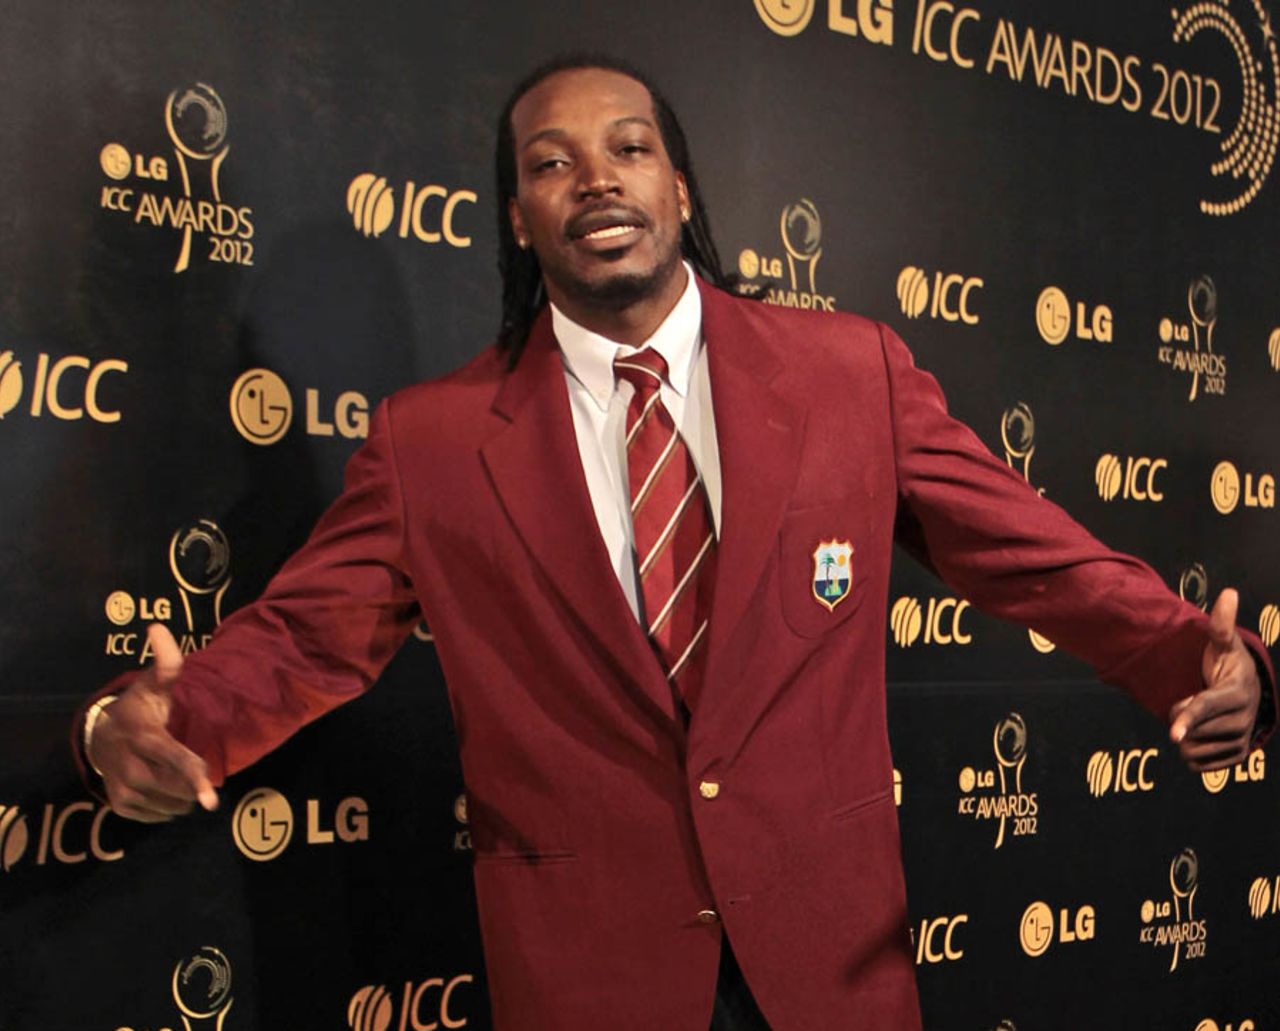 Chris Gayle at the ICC Awards 2012, Colombo, September 15, 2012